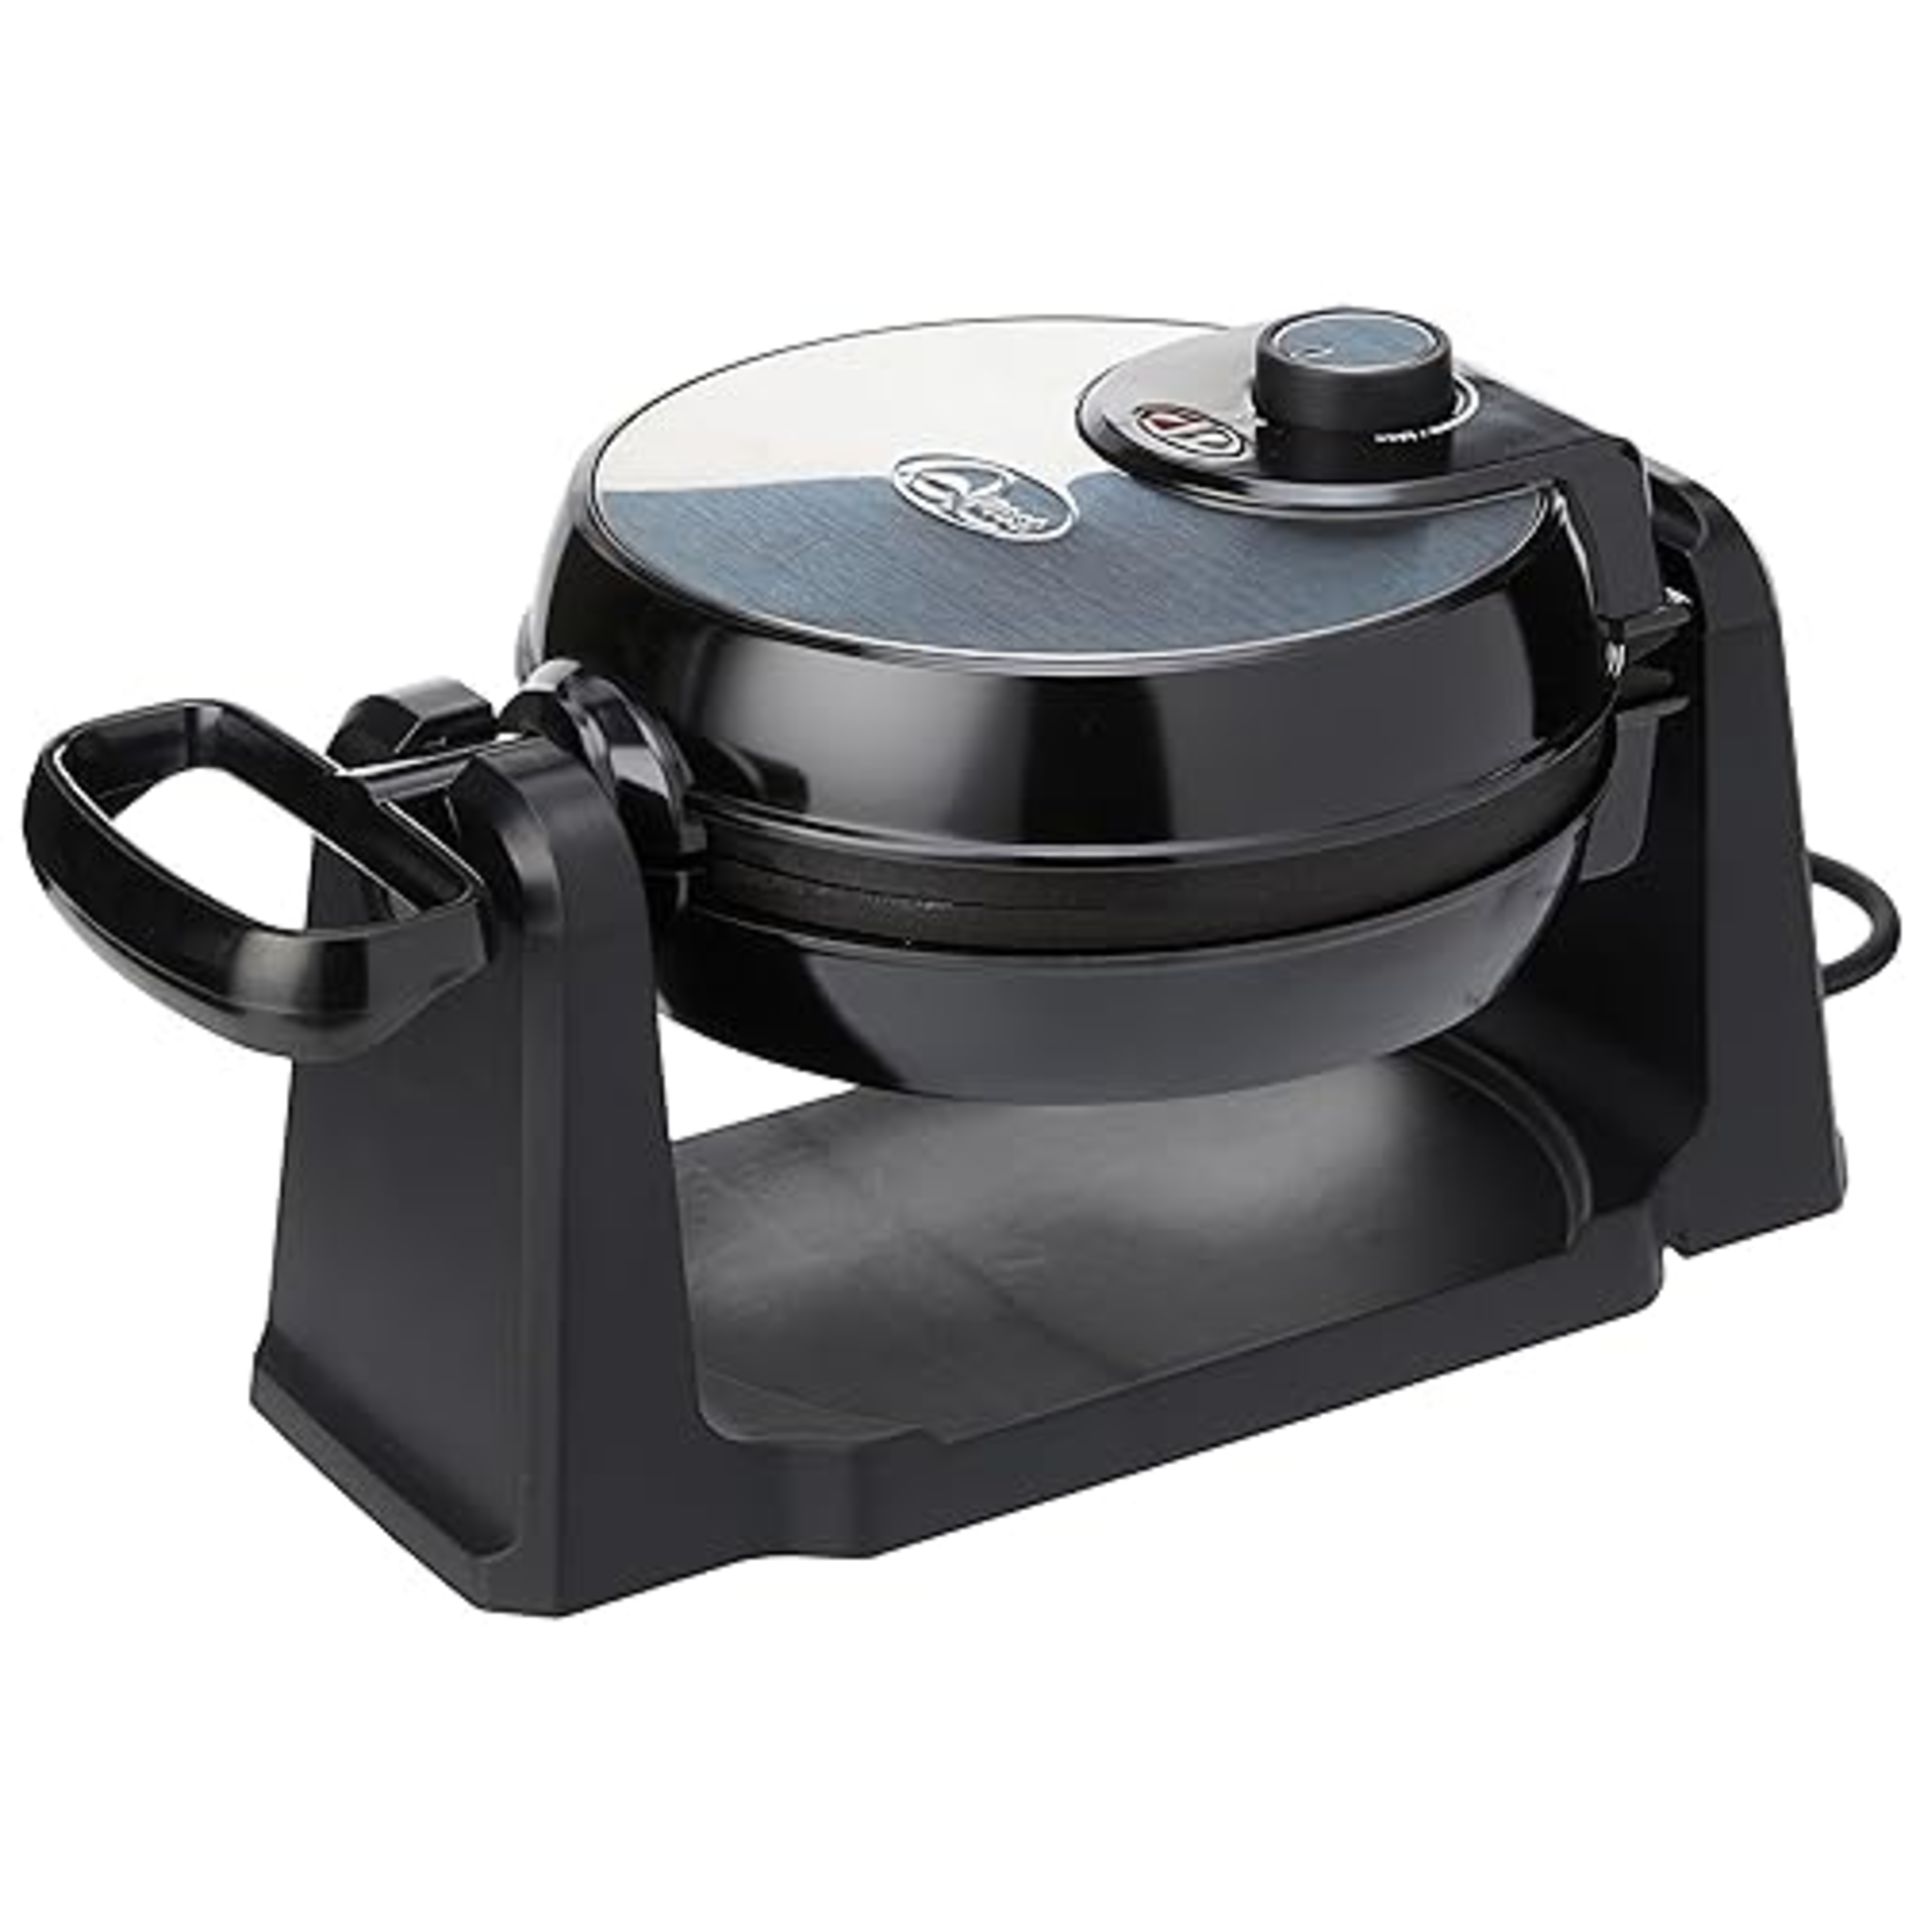 Quest 35969 Rotating Belgian Waffle Maker / Non Stick Plates / Temperature Control / Cooks up to 4 